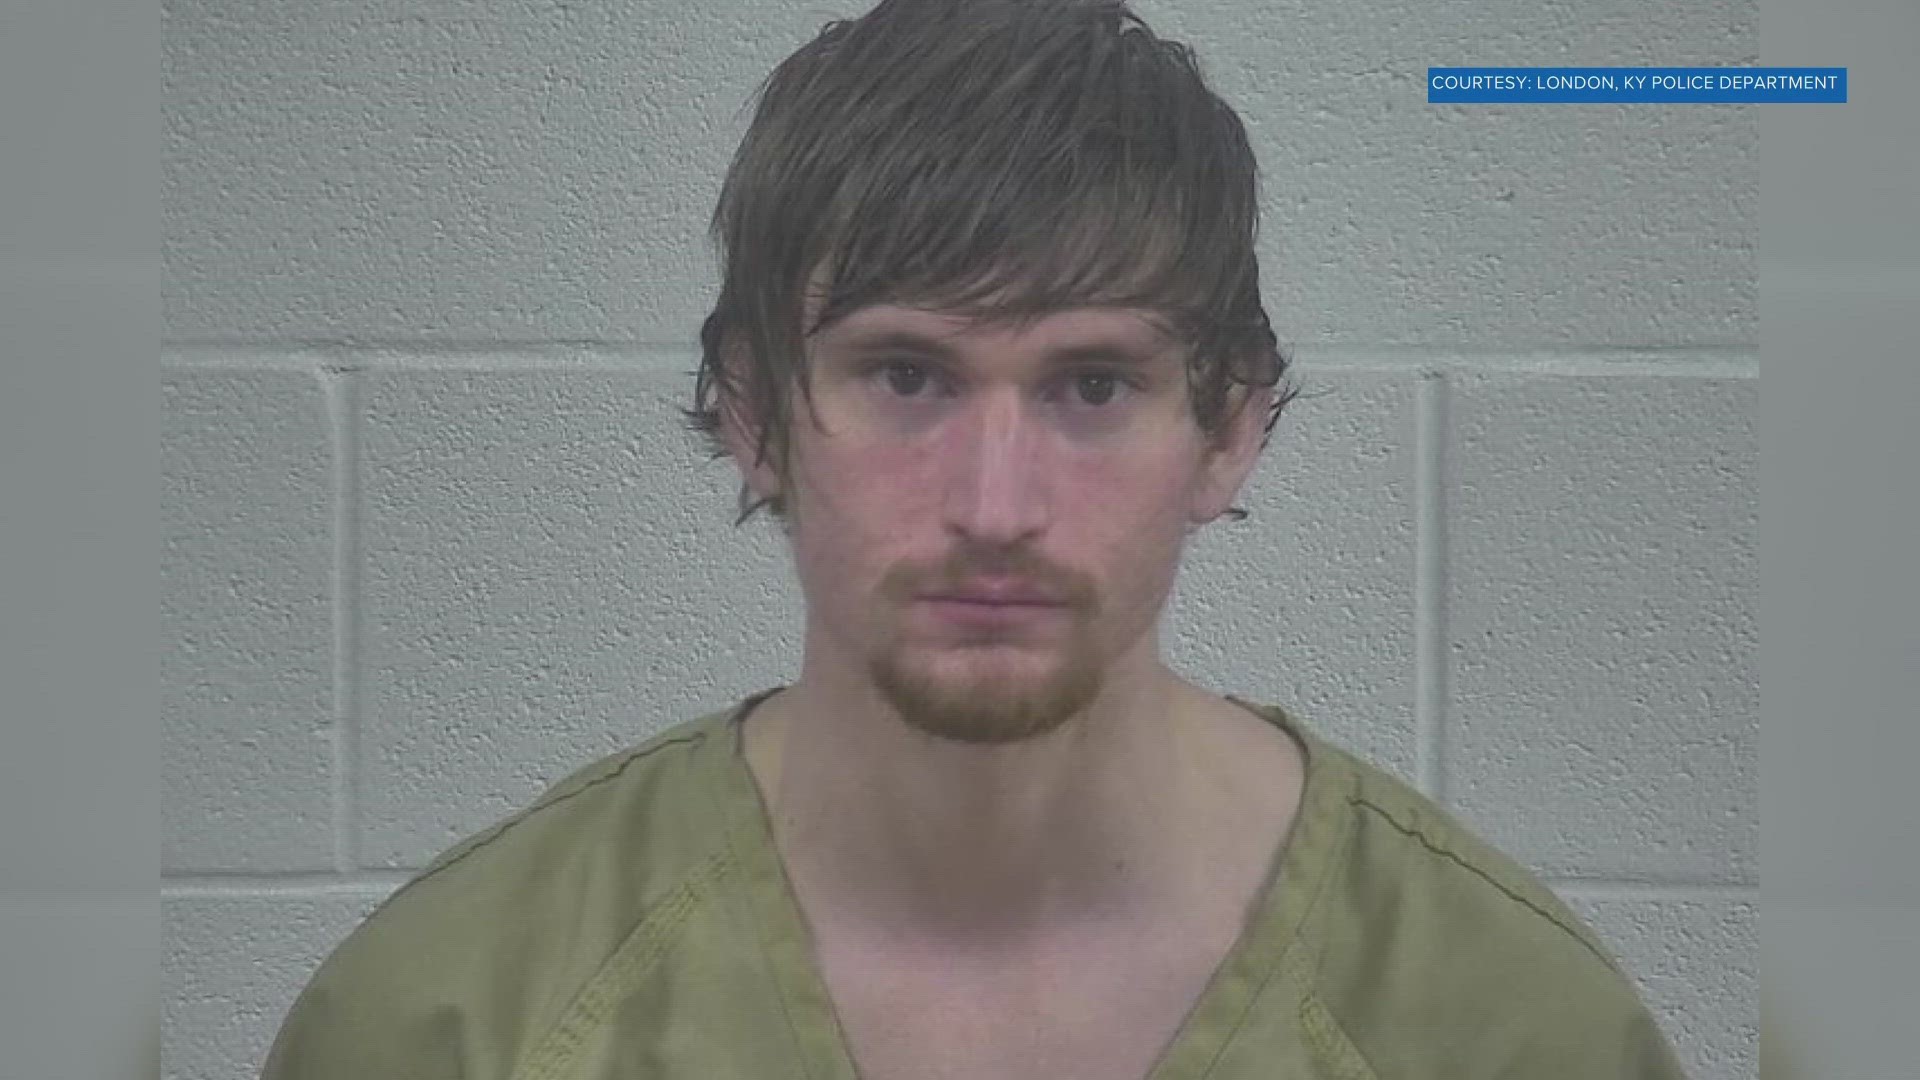 ​John Driscoll, a 26-year-old, admitted to officers that he had been drinking and stole the bus from South Laurel High School in Kentucky, police said.